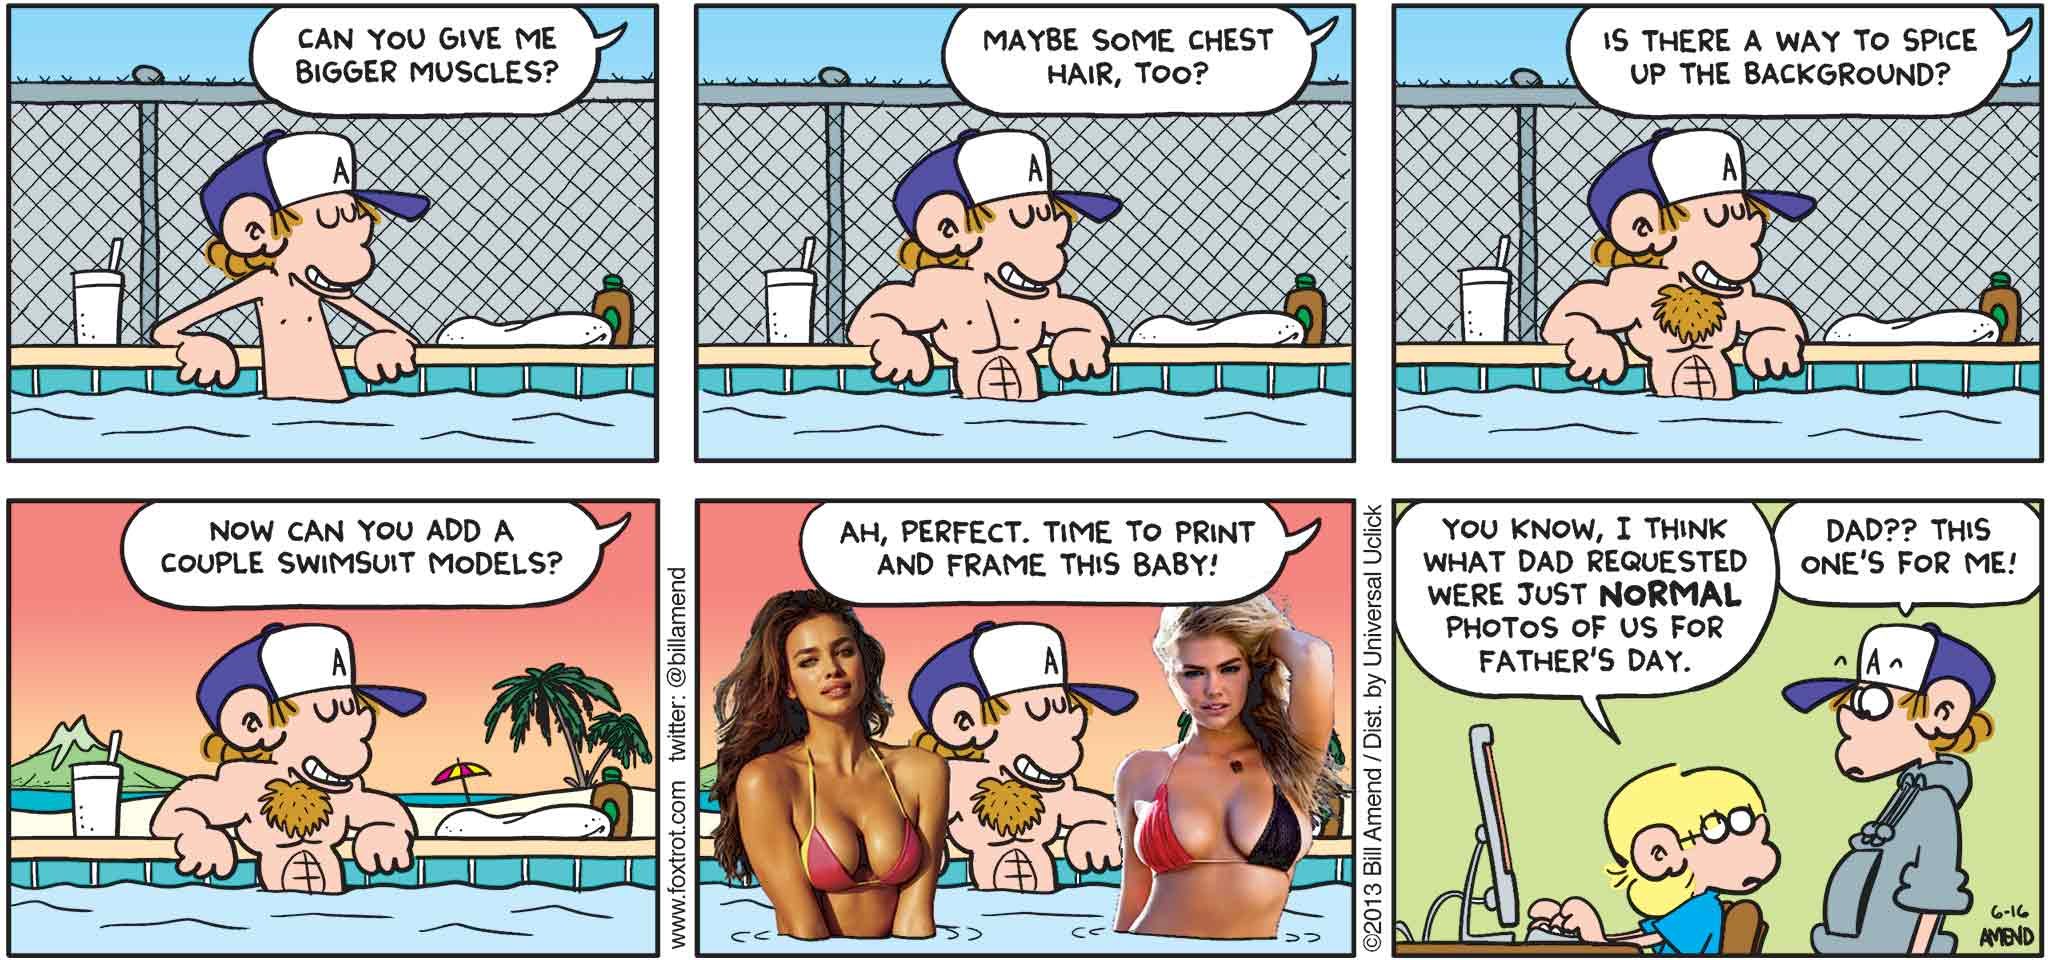 FoxTrot by Bill Amend - Father's Day comic published June 16, 2013 - Peter: Can you give me bigger muscles? Maybe some chest hair, too? Is there a way to spice up the background? Now can you add a couple of swimsuit models? Perfect. Time to print and frame this baby! Jason: You know, I think what dad requested were just normal photos of us for Father's Day. Peter: Dad?? This one's for me!